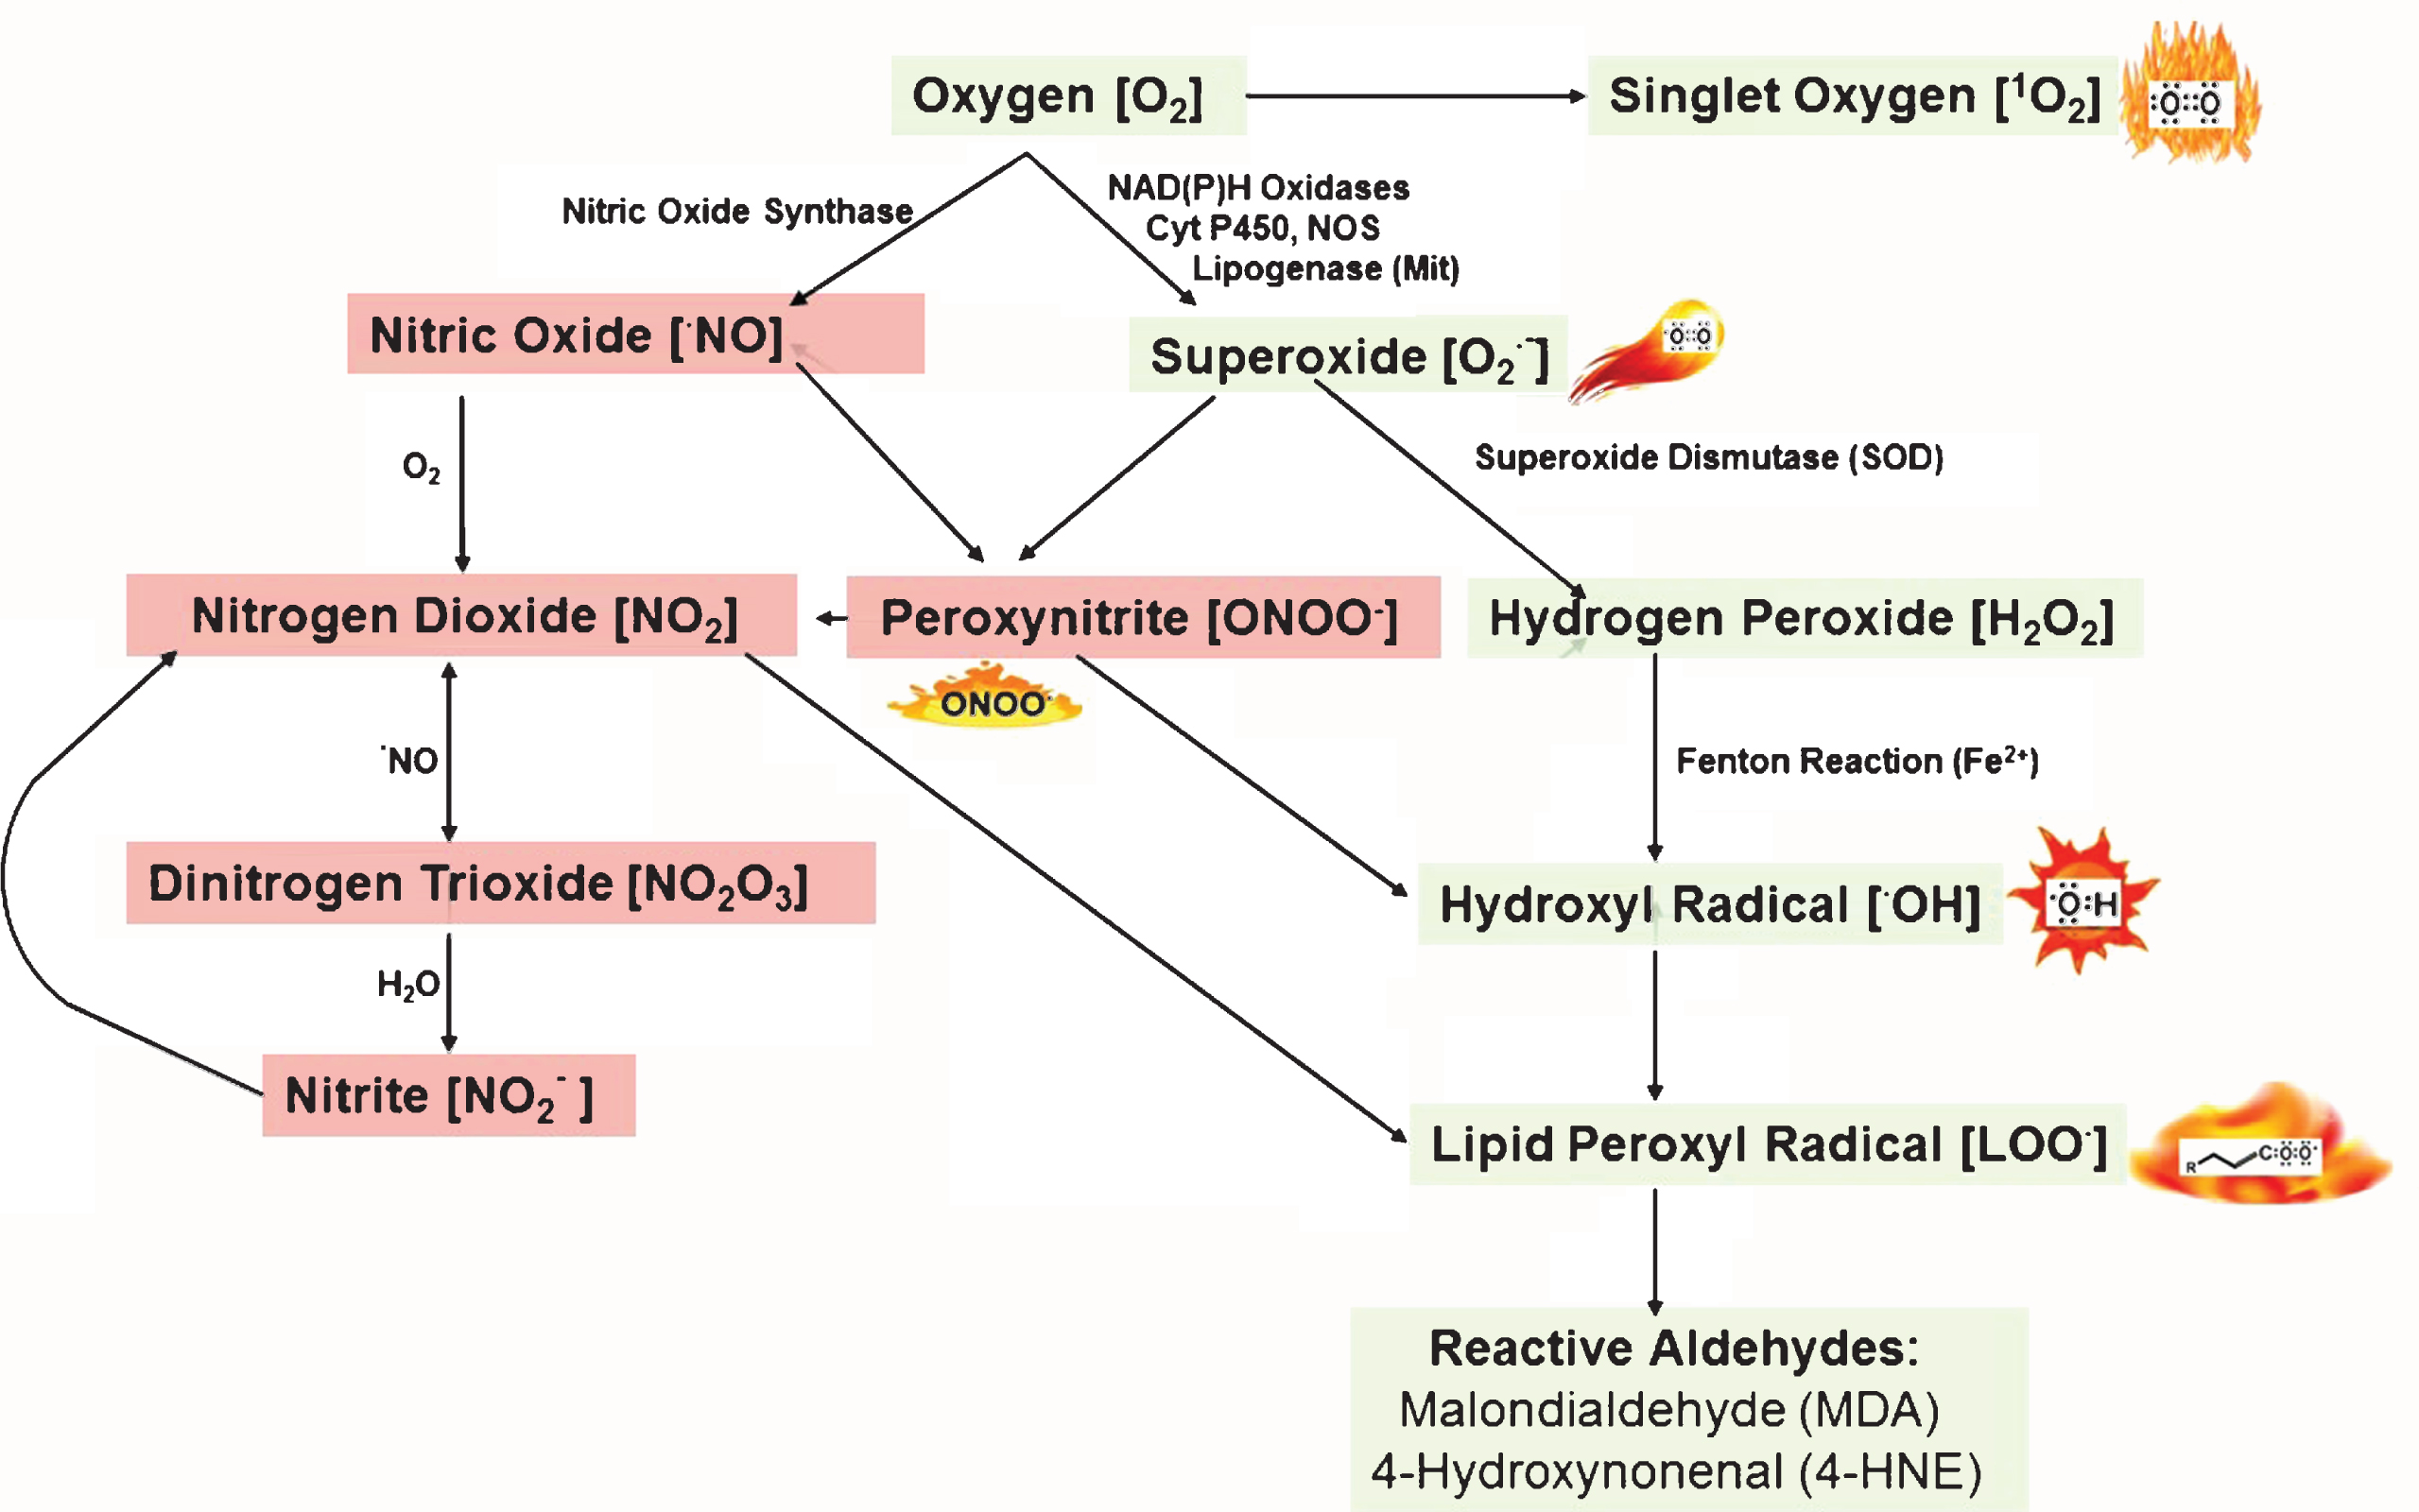 Reactive oxygen and nitrogen species: Generation and their reactions. Adapted from Kalyanaraman, 2013 [28] and Yan et al. [38].